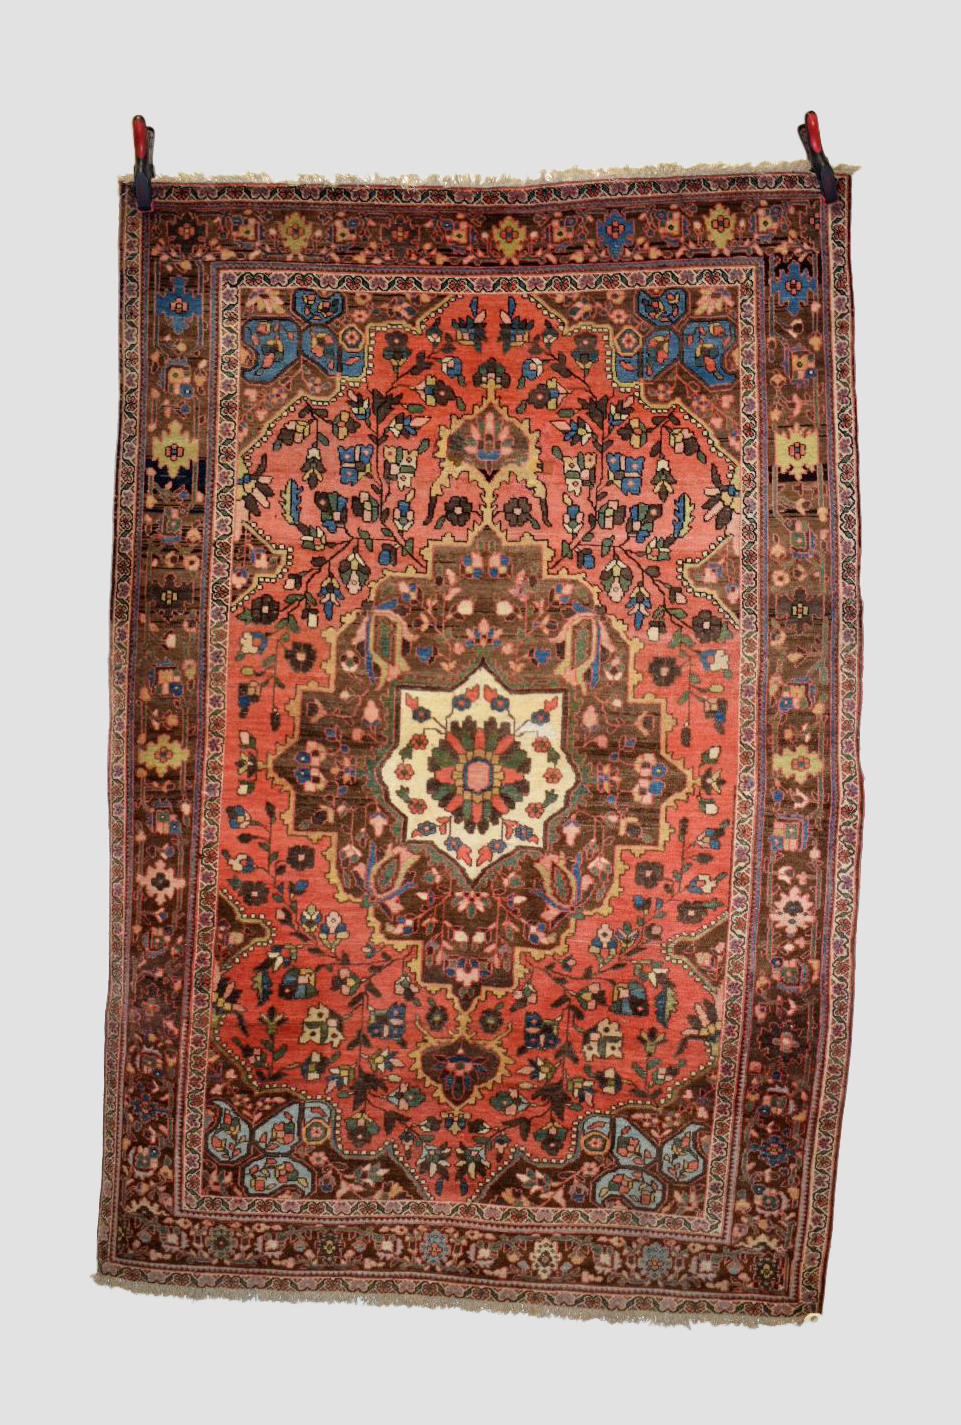 Saruk rug, north west Persia, circa 1930s-40s, 6ft. 8in. X 4ft. 8in. 2.03m. X 1.42m. Slight loss